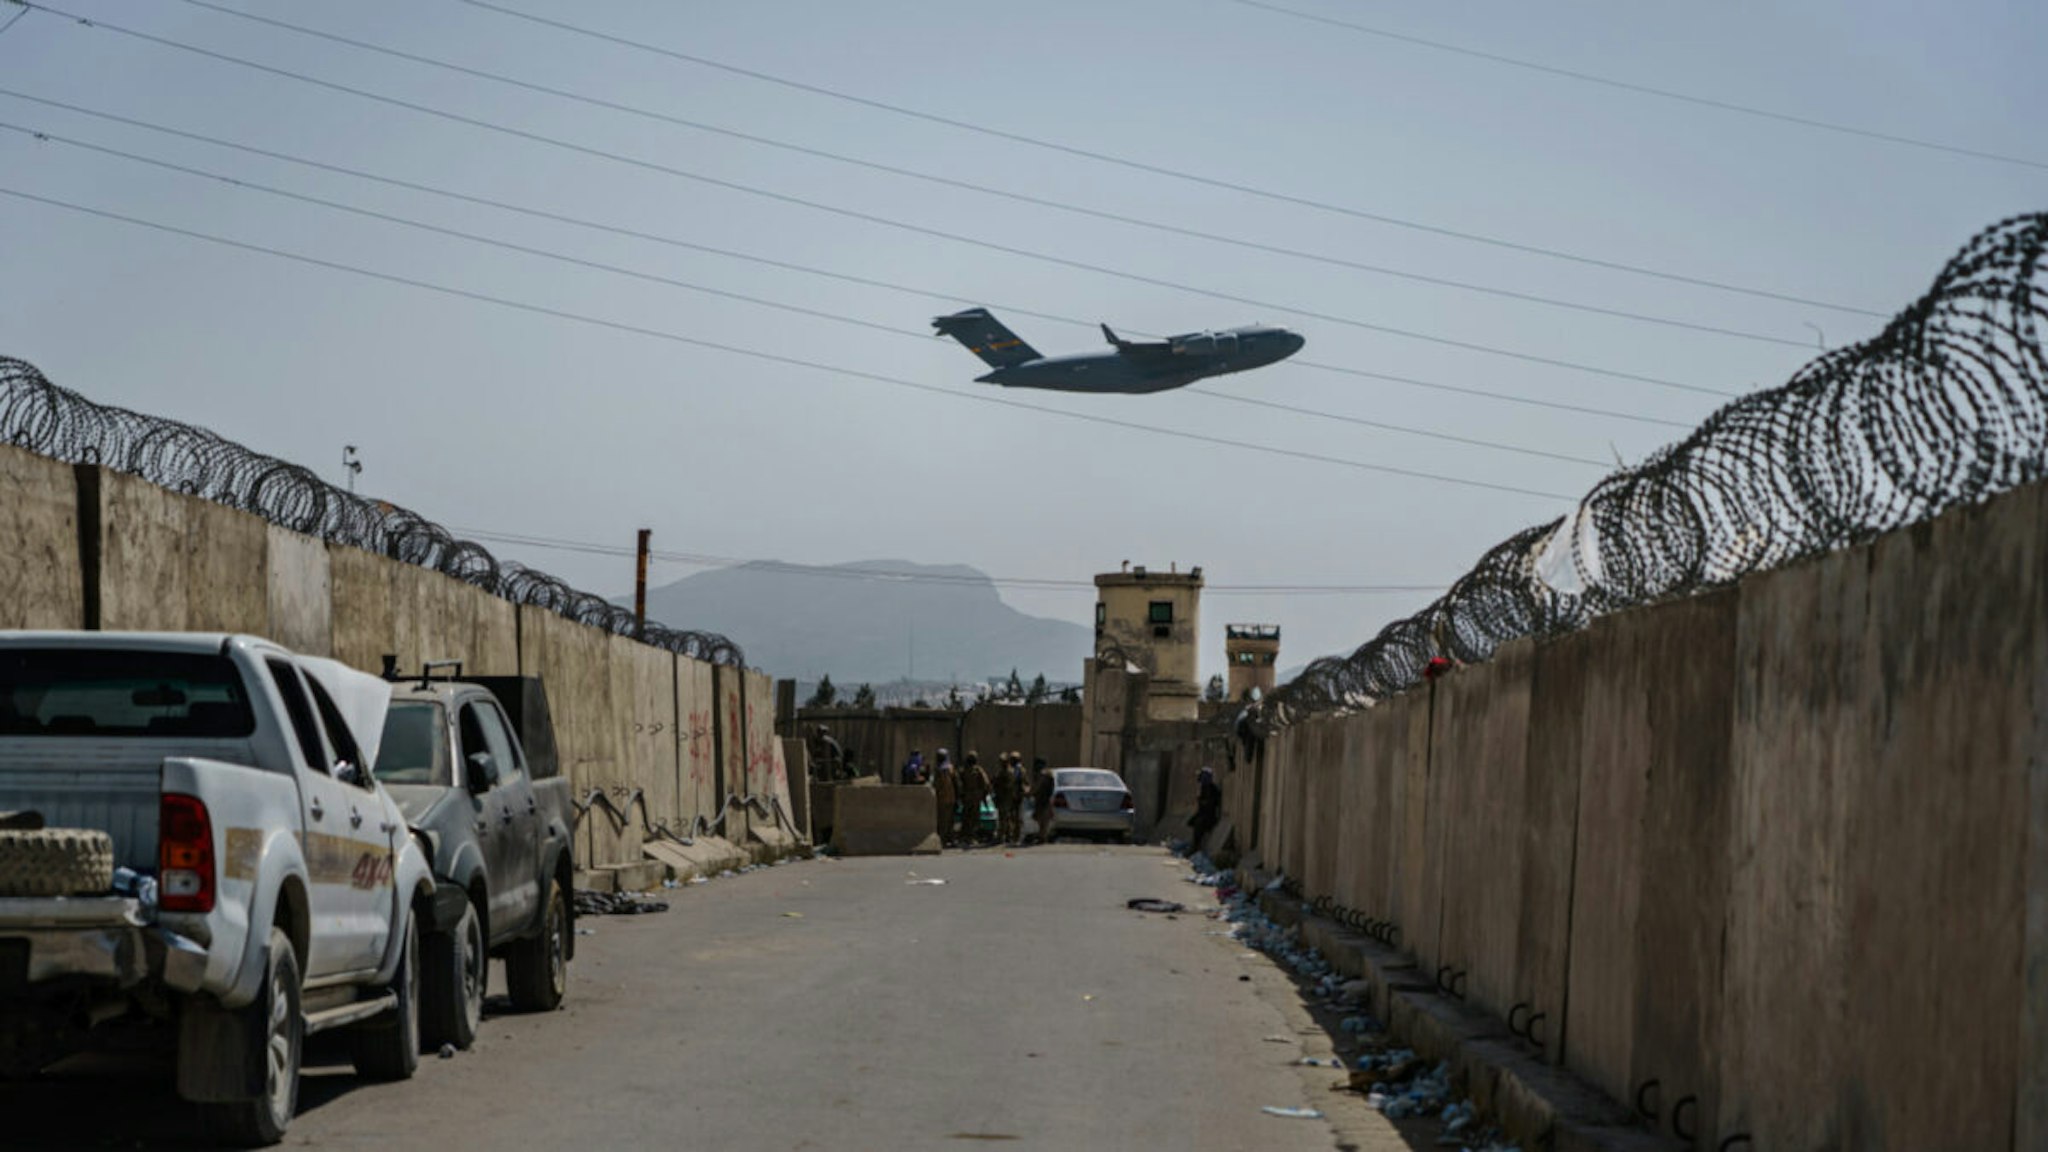 A C-17 Globemaster takes off as Taliban fighters secure the outer perimeter, alongside the American controlled side of of the Hamid Karzai International Airport in Kabul, Afghanistan, Sunday, Aug. 29, 2021.